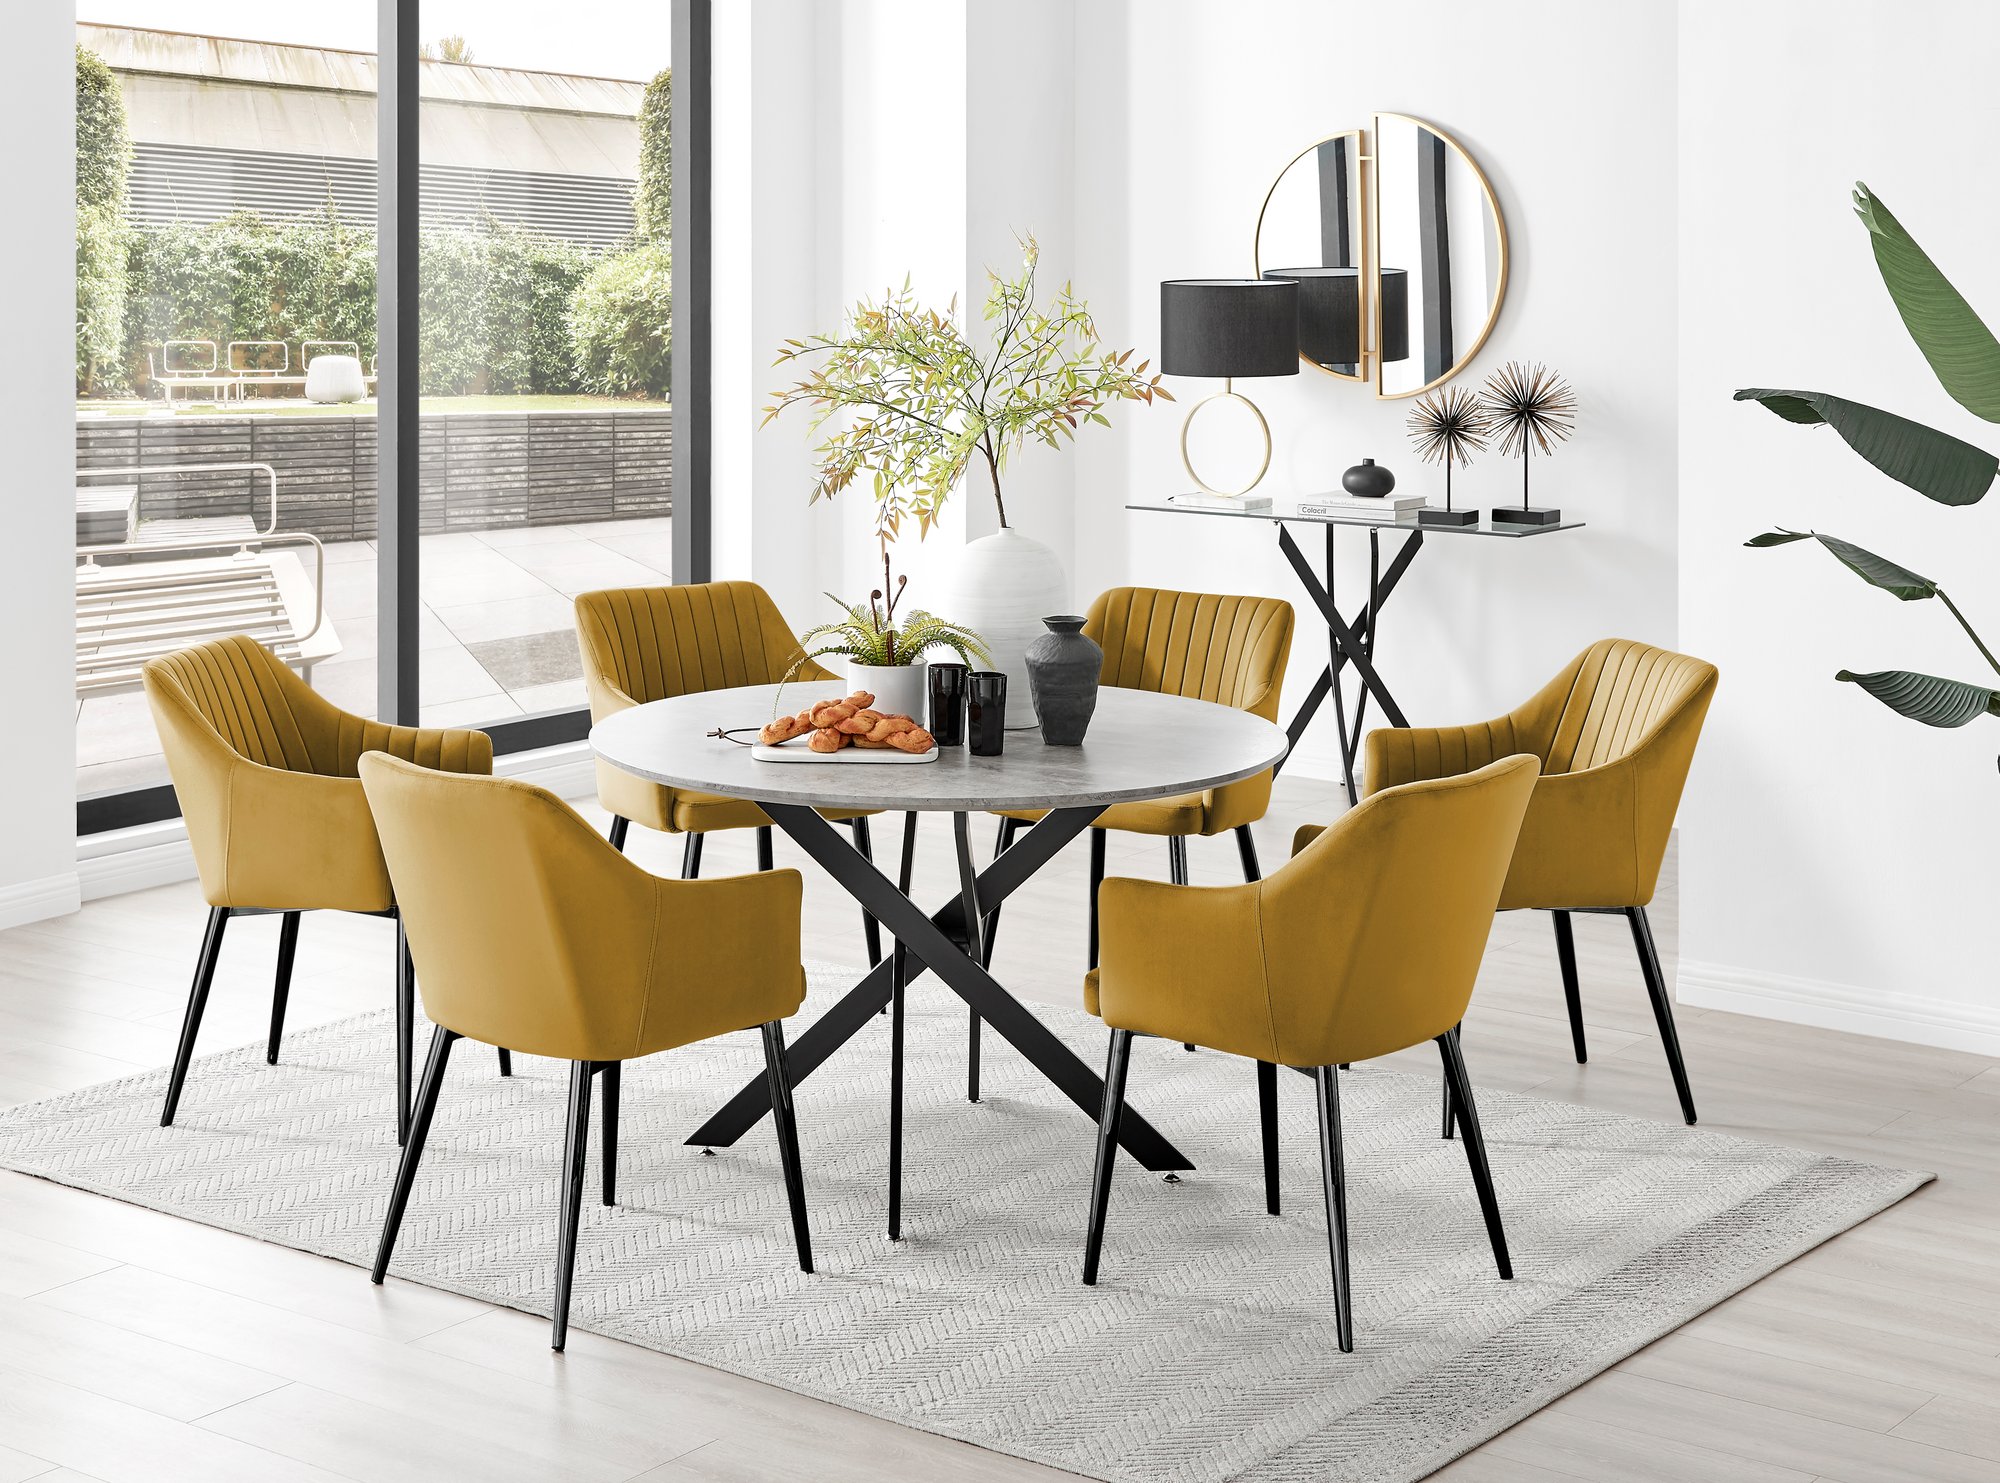 Novara 120cm 4 6 Seater Round Glass Dining Table with Black Metal Starburst  Legs for Modern Industrial Minimalist Dining Room